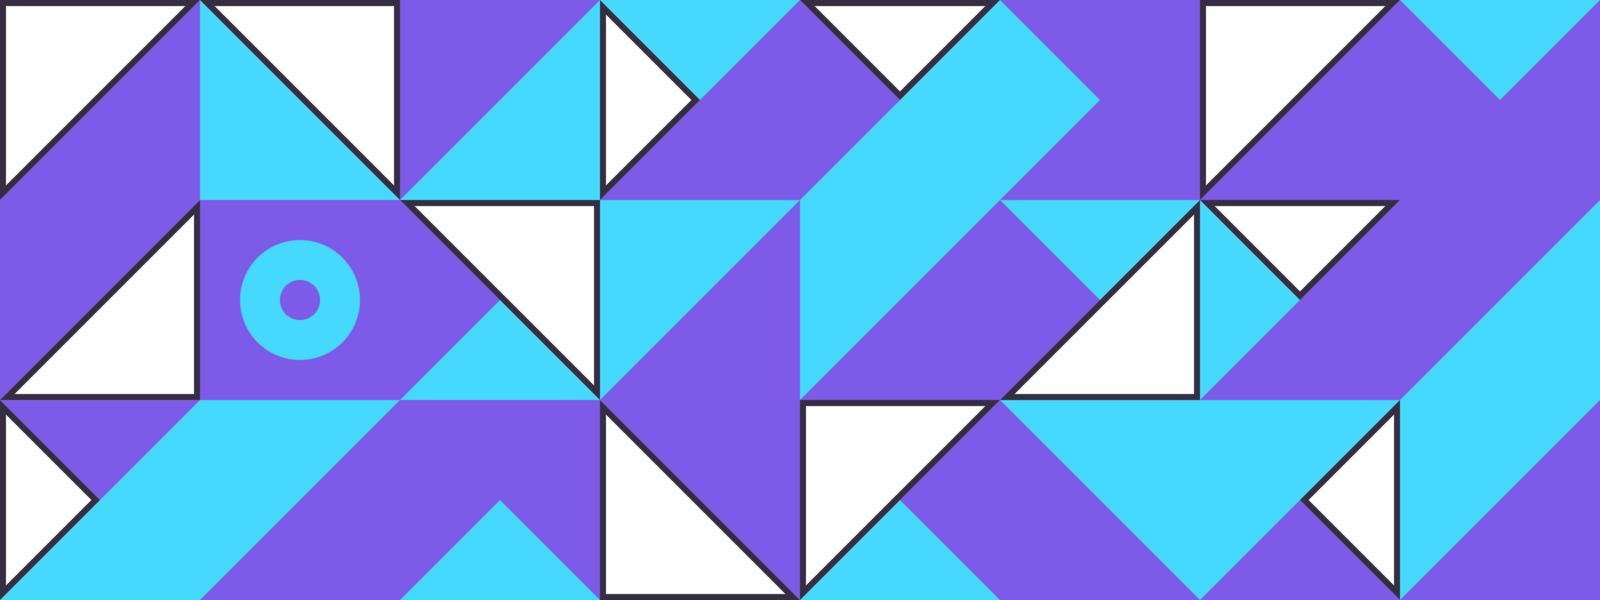 Simple banner of decorative patterns square modules colored geometric composition in Scandinavian style